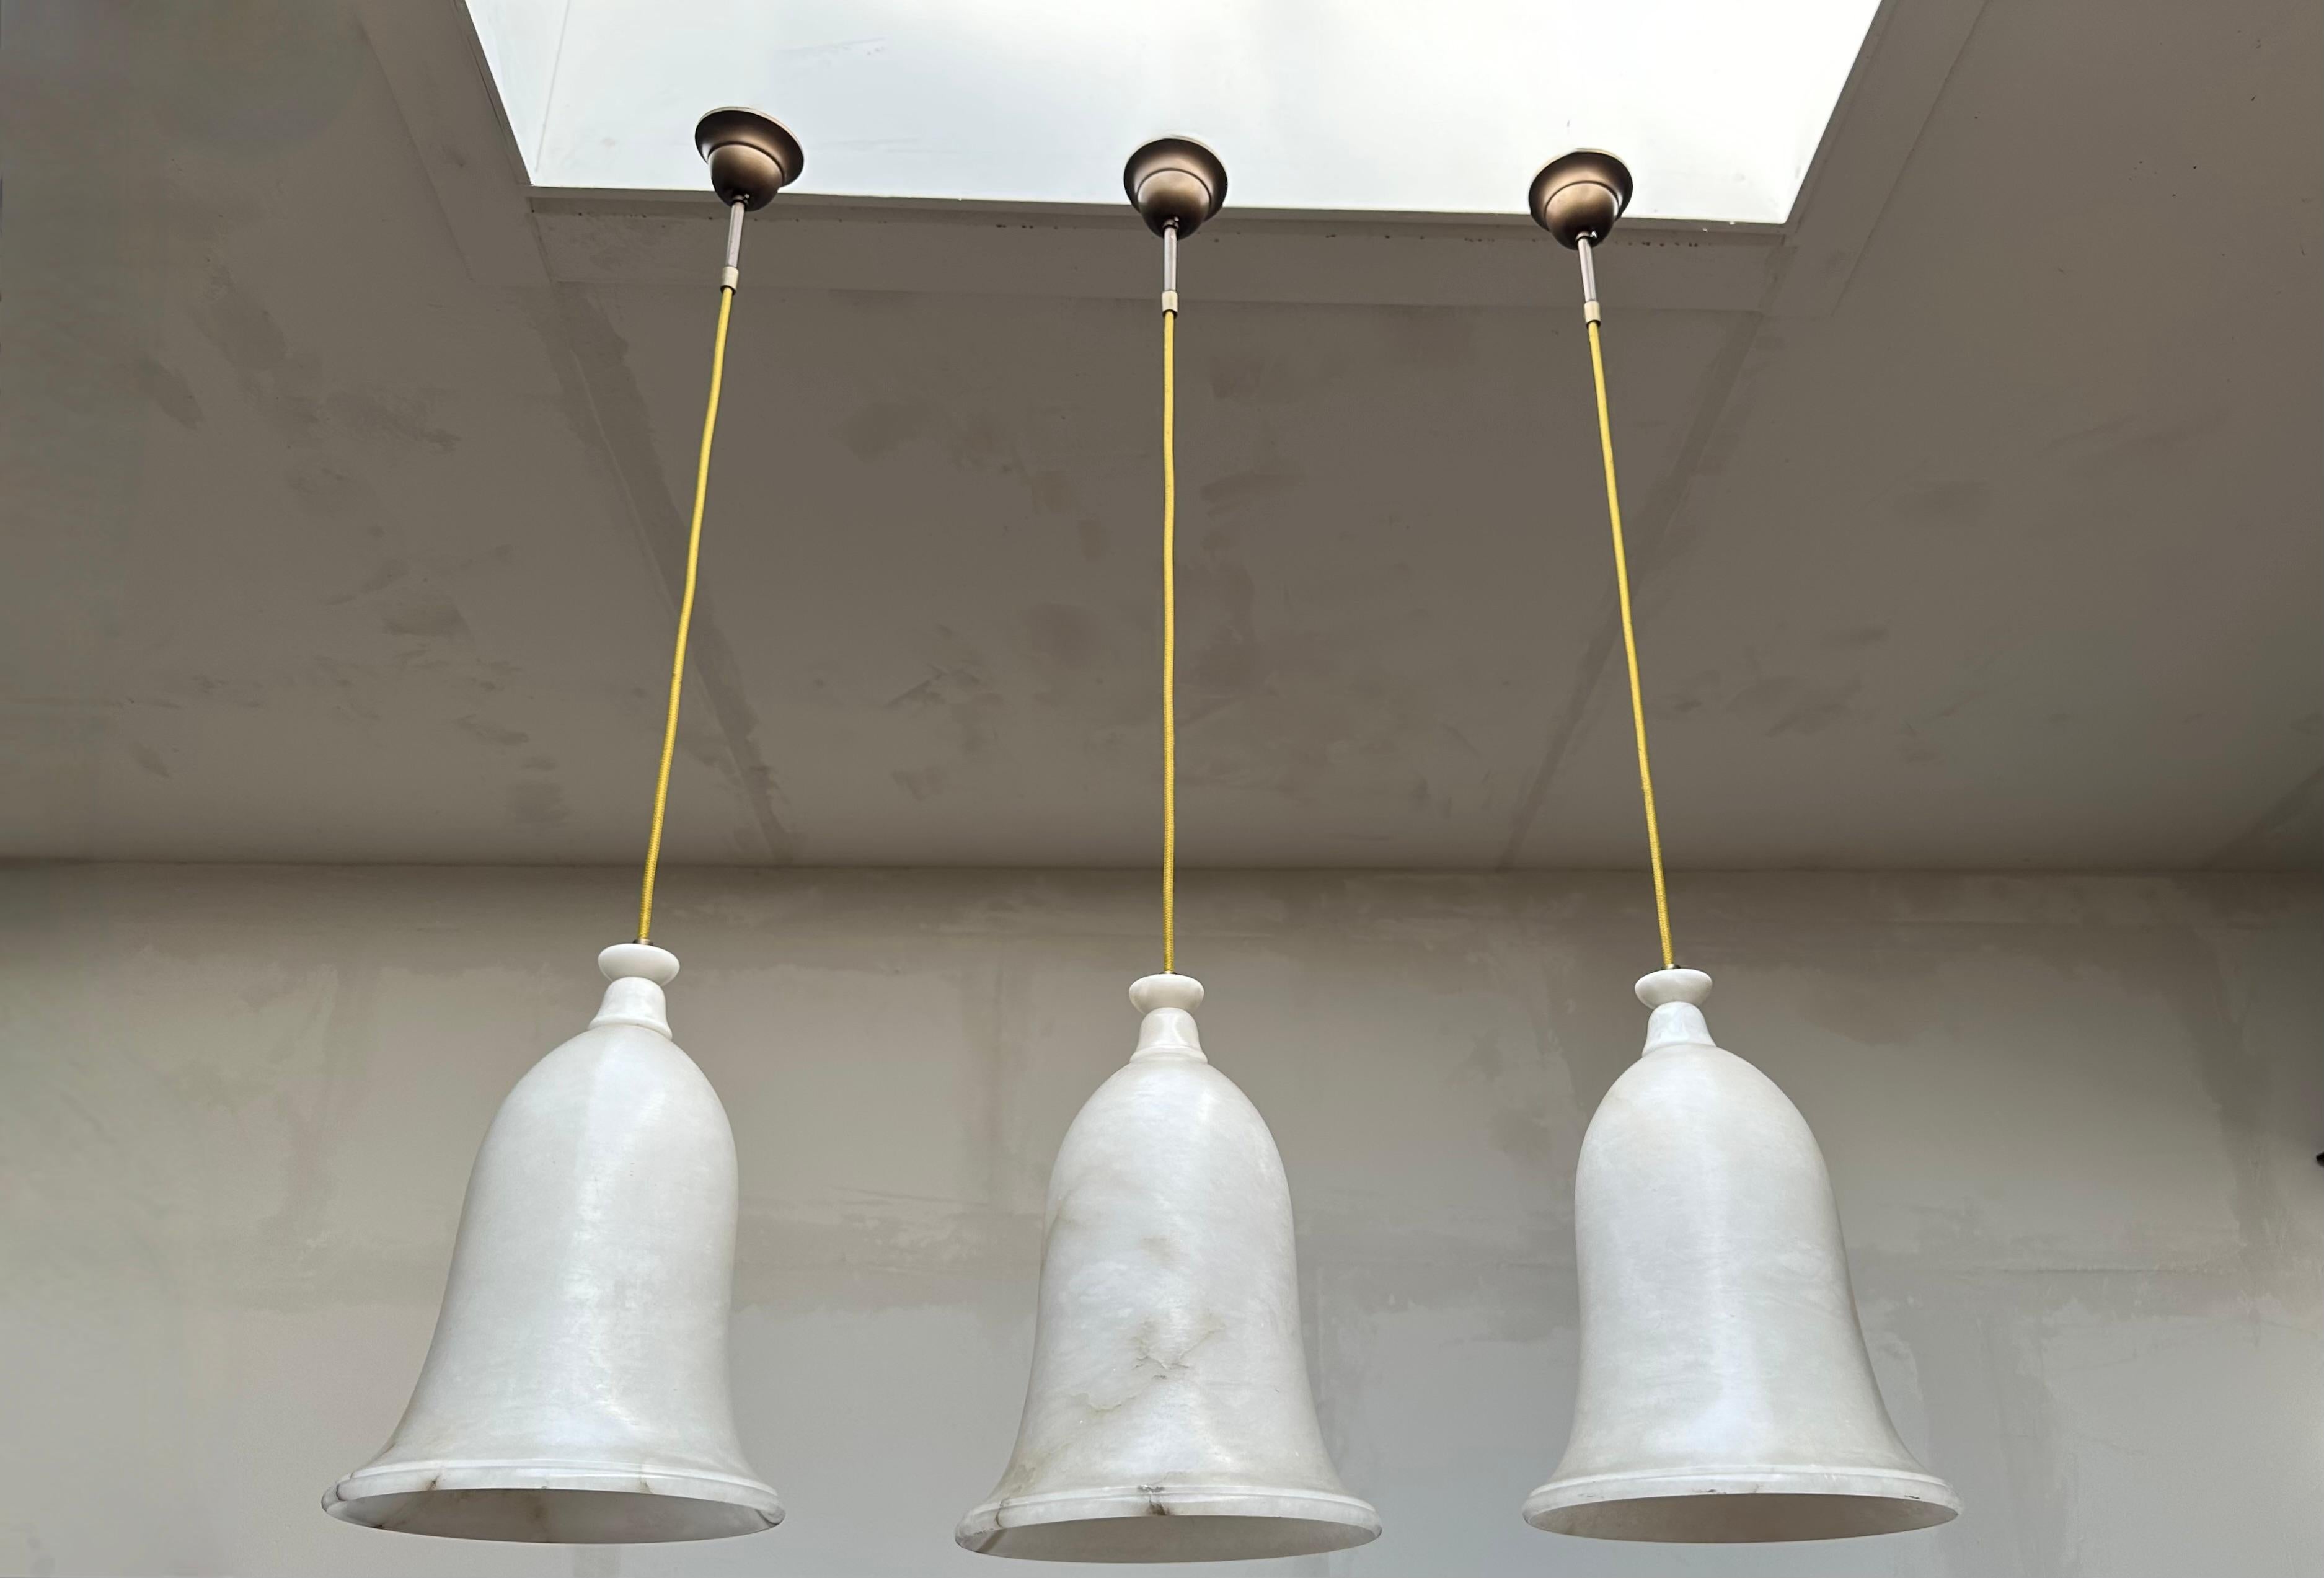 Large size and great shape group of three identical alabaster pendants.

If you are looking for a group of beautiful and truly stylish pendants for a midcentury, for an Art Deco or for a contemporary interior then this set of three could be your